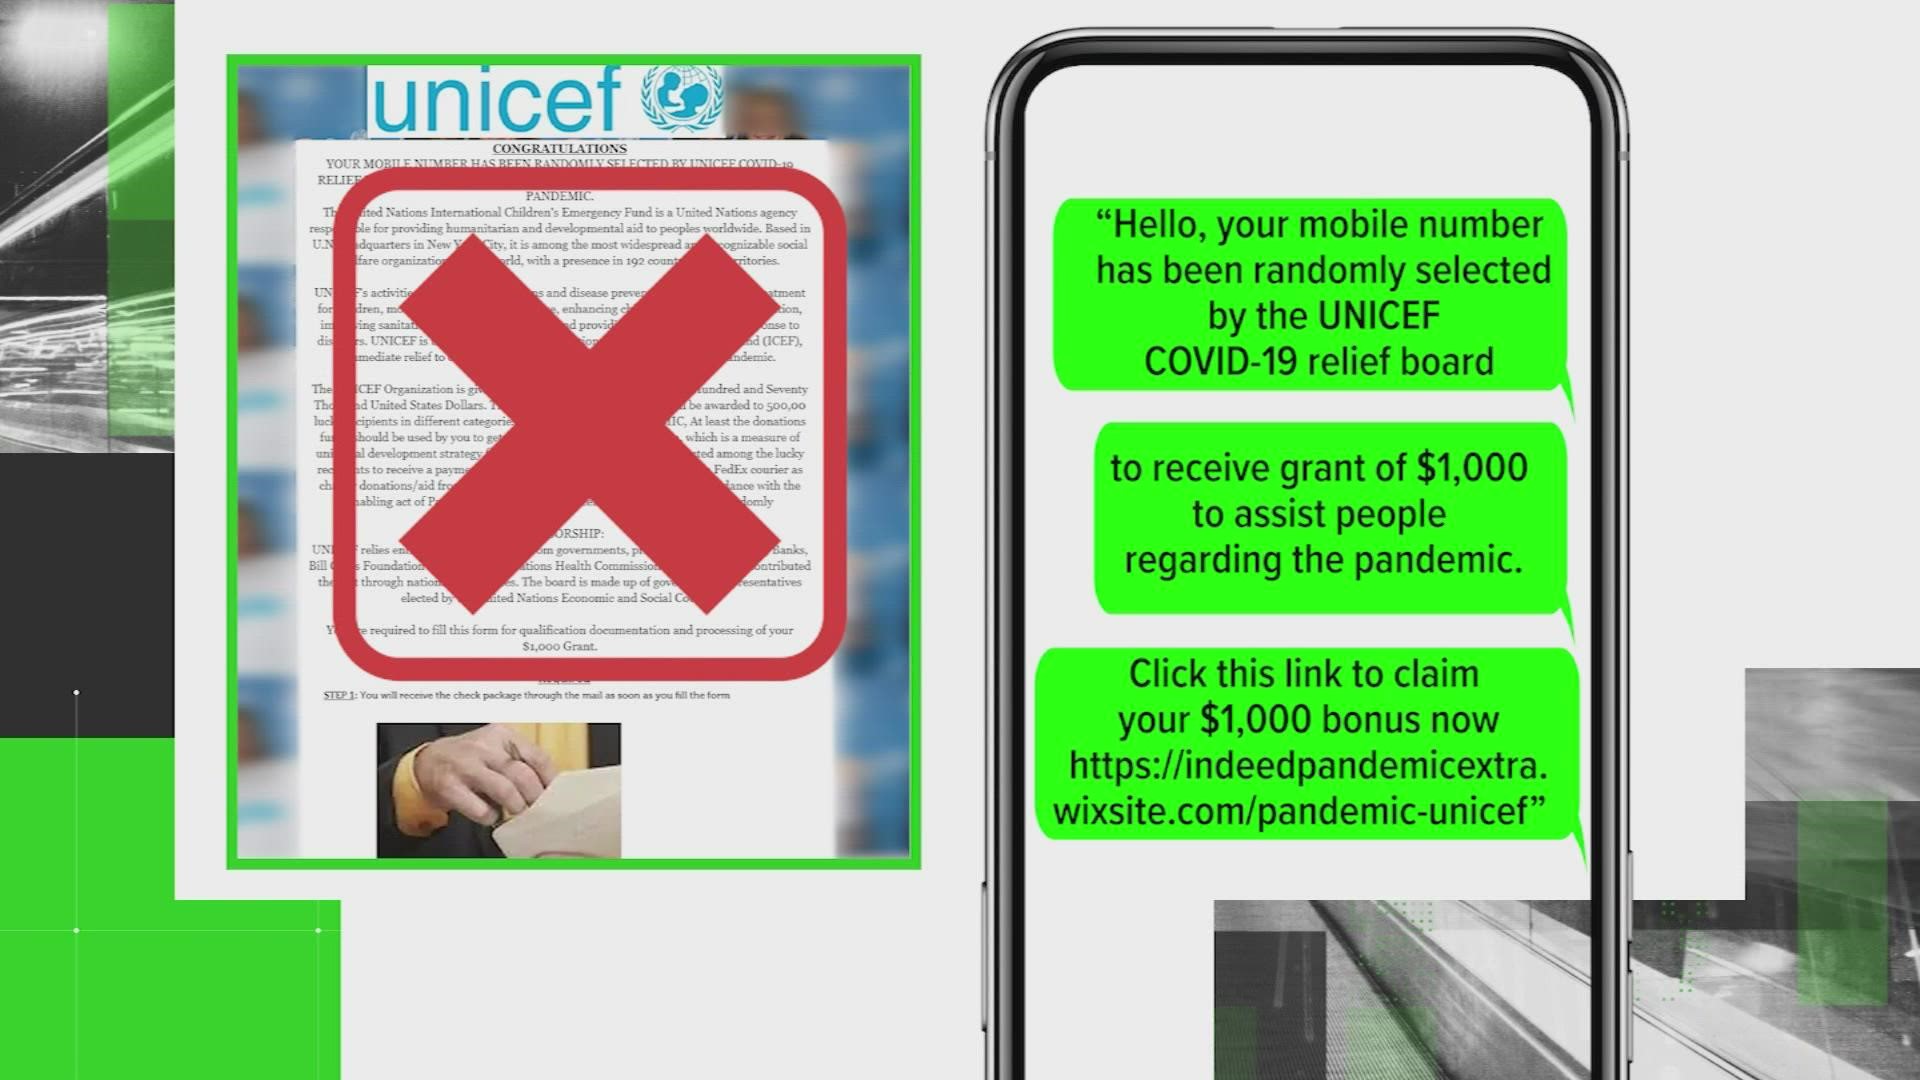 UNICEF said the text message appears to be a scam.